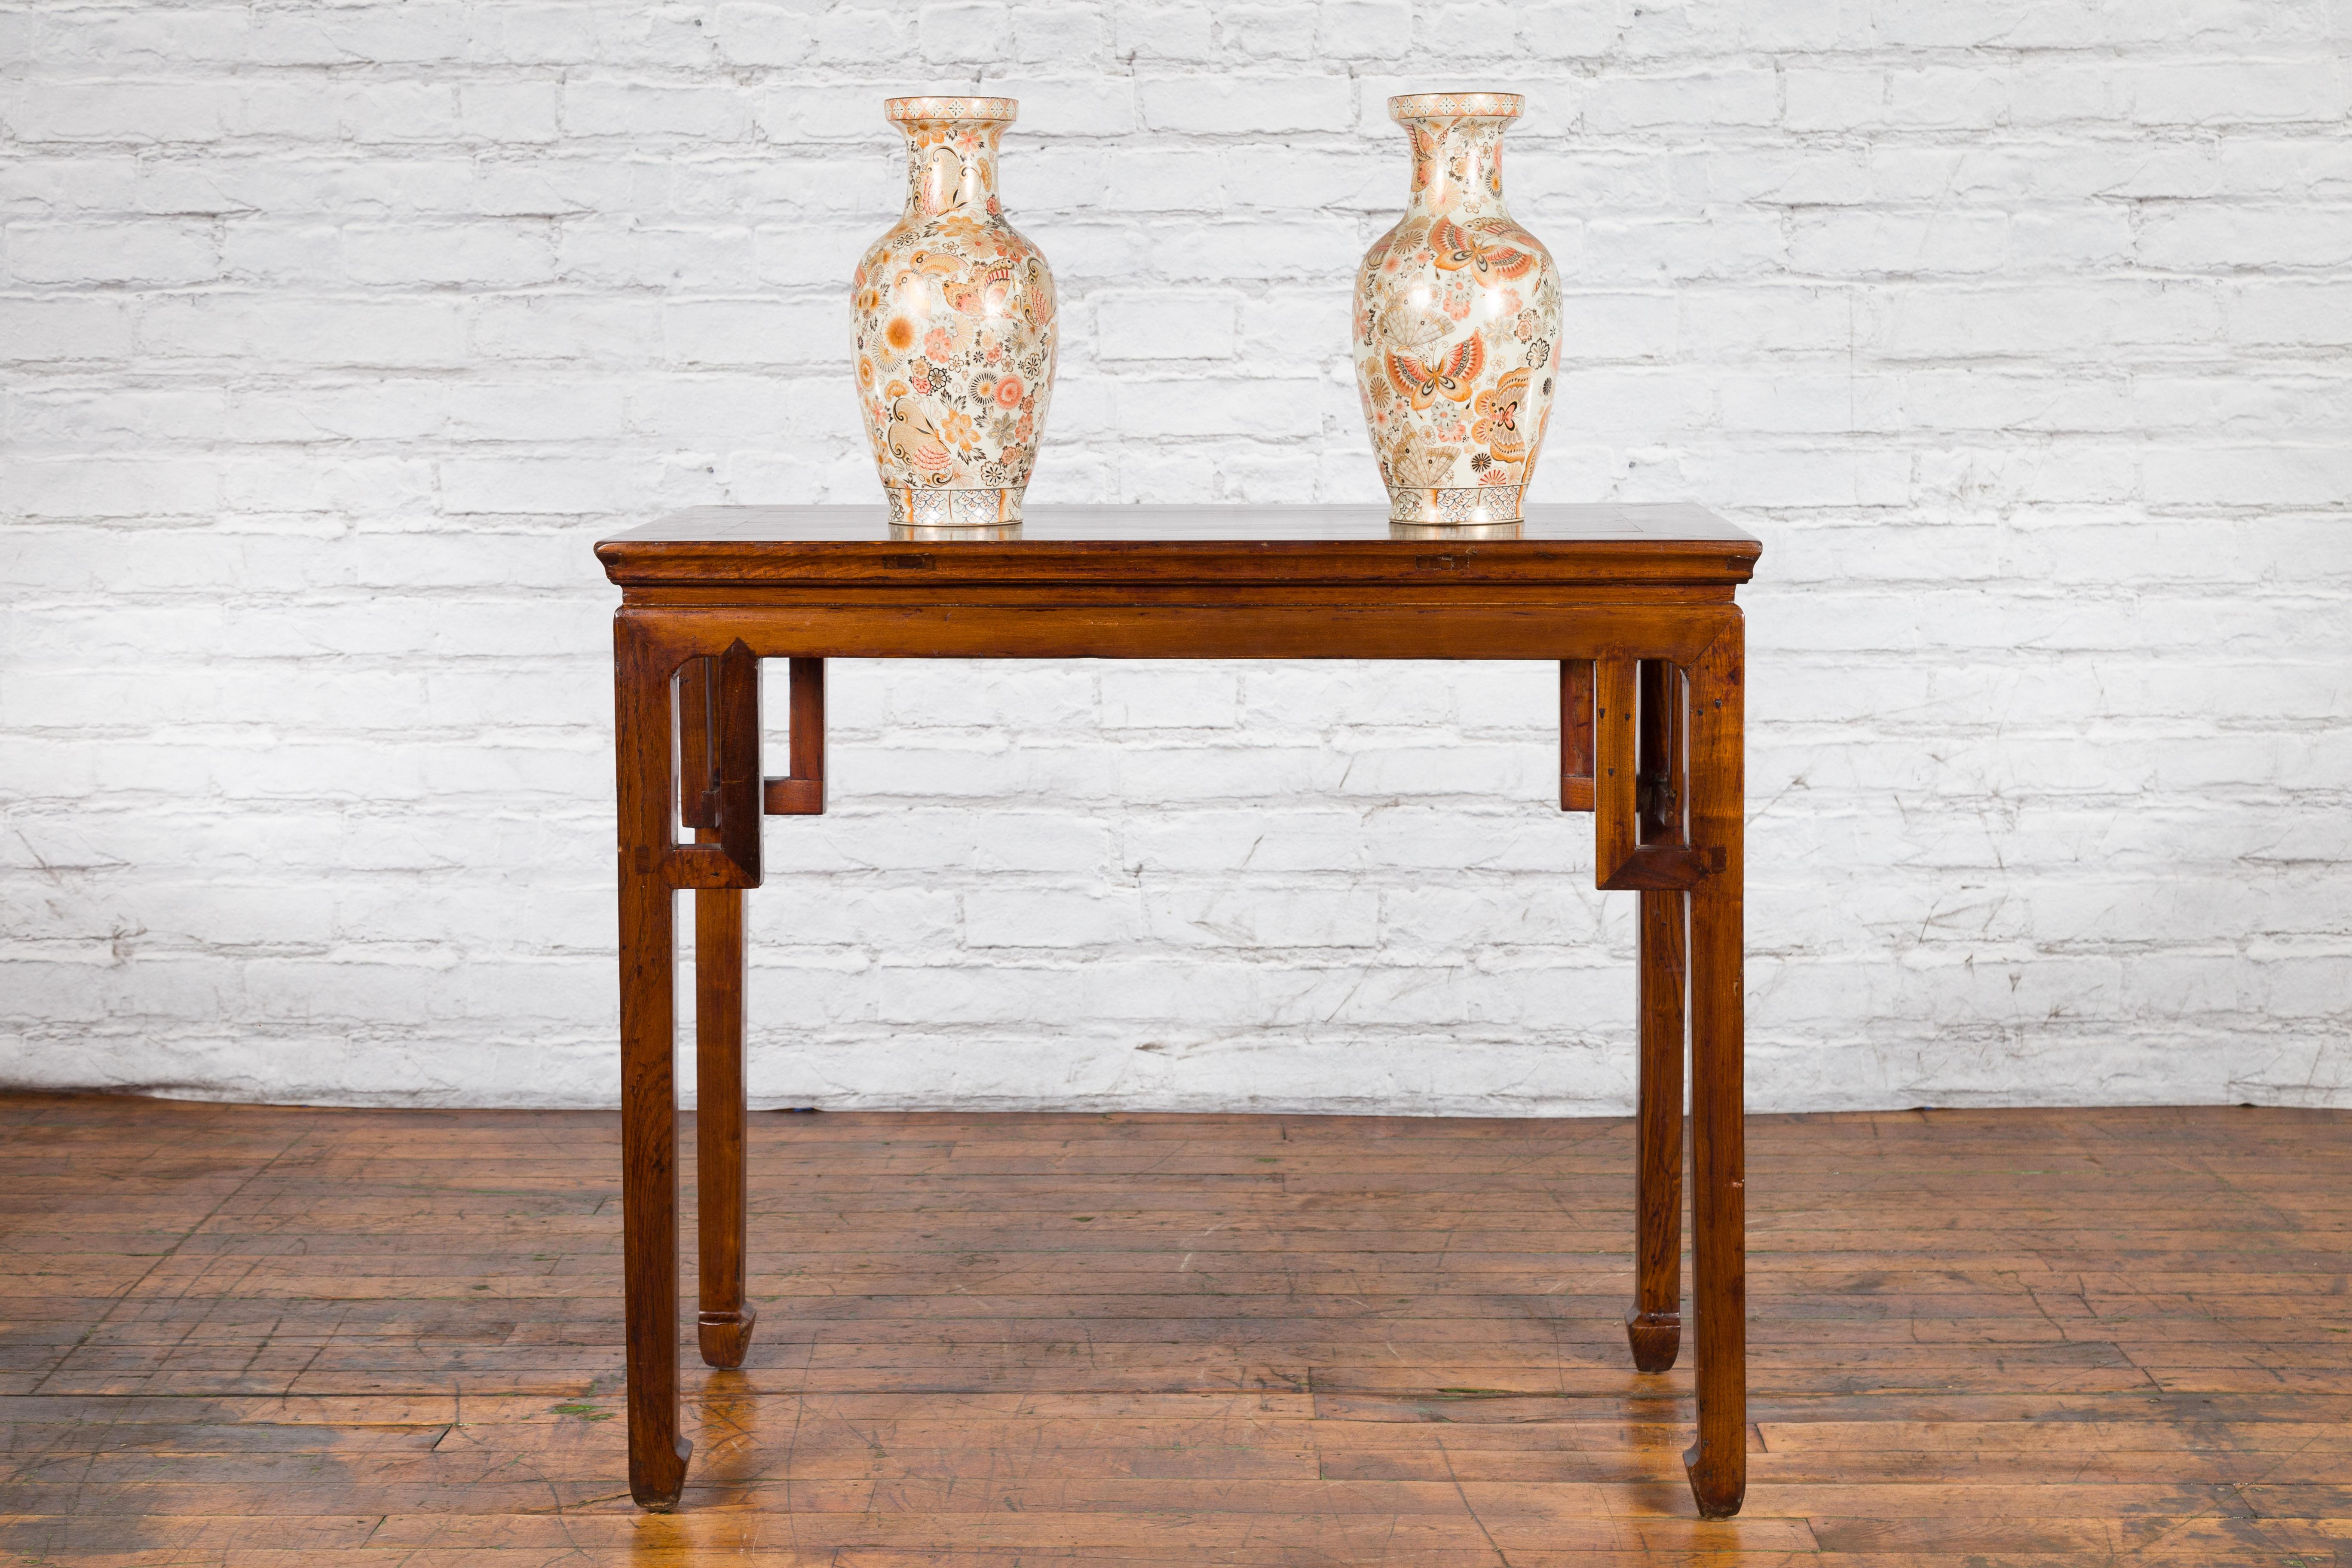 Wood Chinese Qing Dynasty Period 19th Century Wine Table with Linear Spandrels